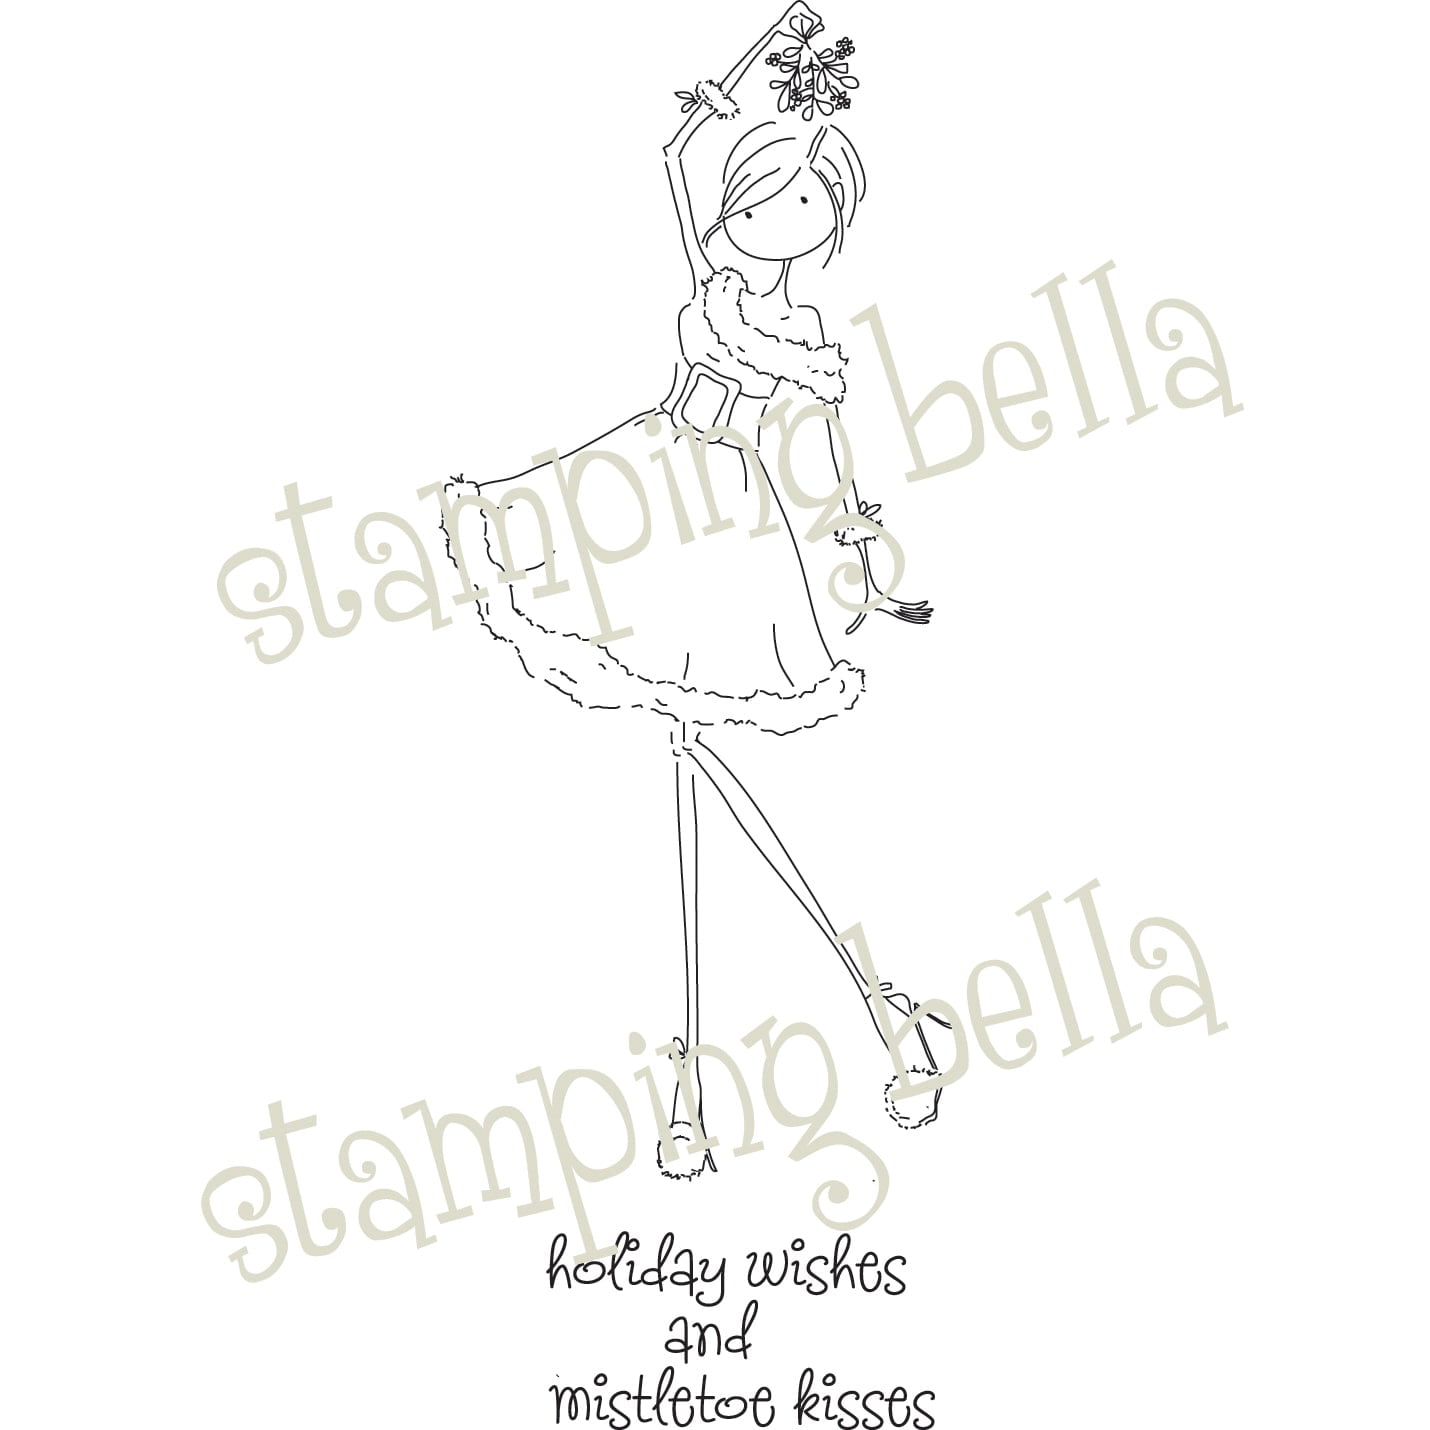 6.5 x 4.5 Stamping Bella Uptown Girl Posh Has A Present Cling Rubber Stamp